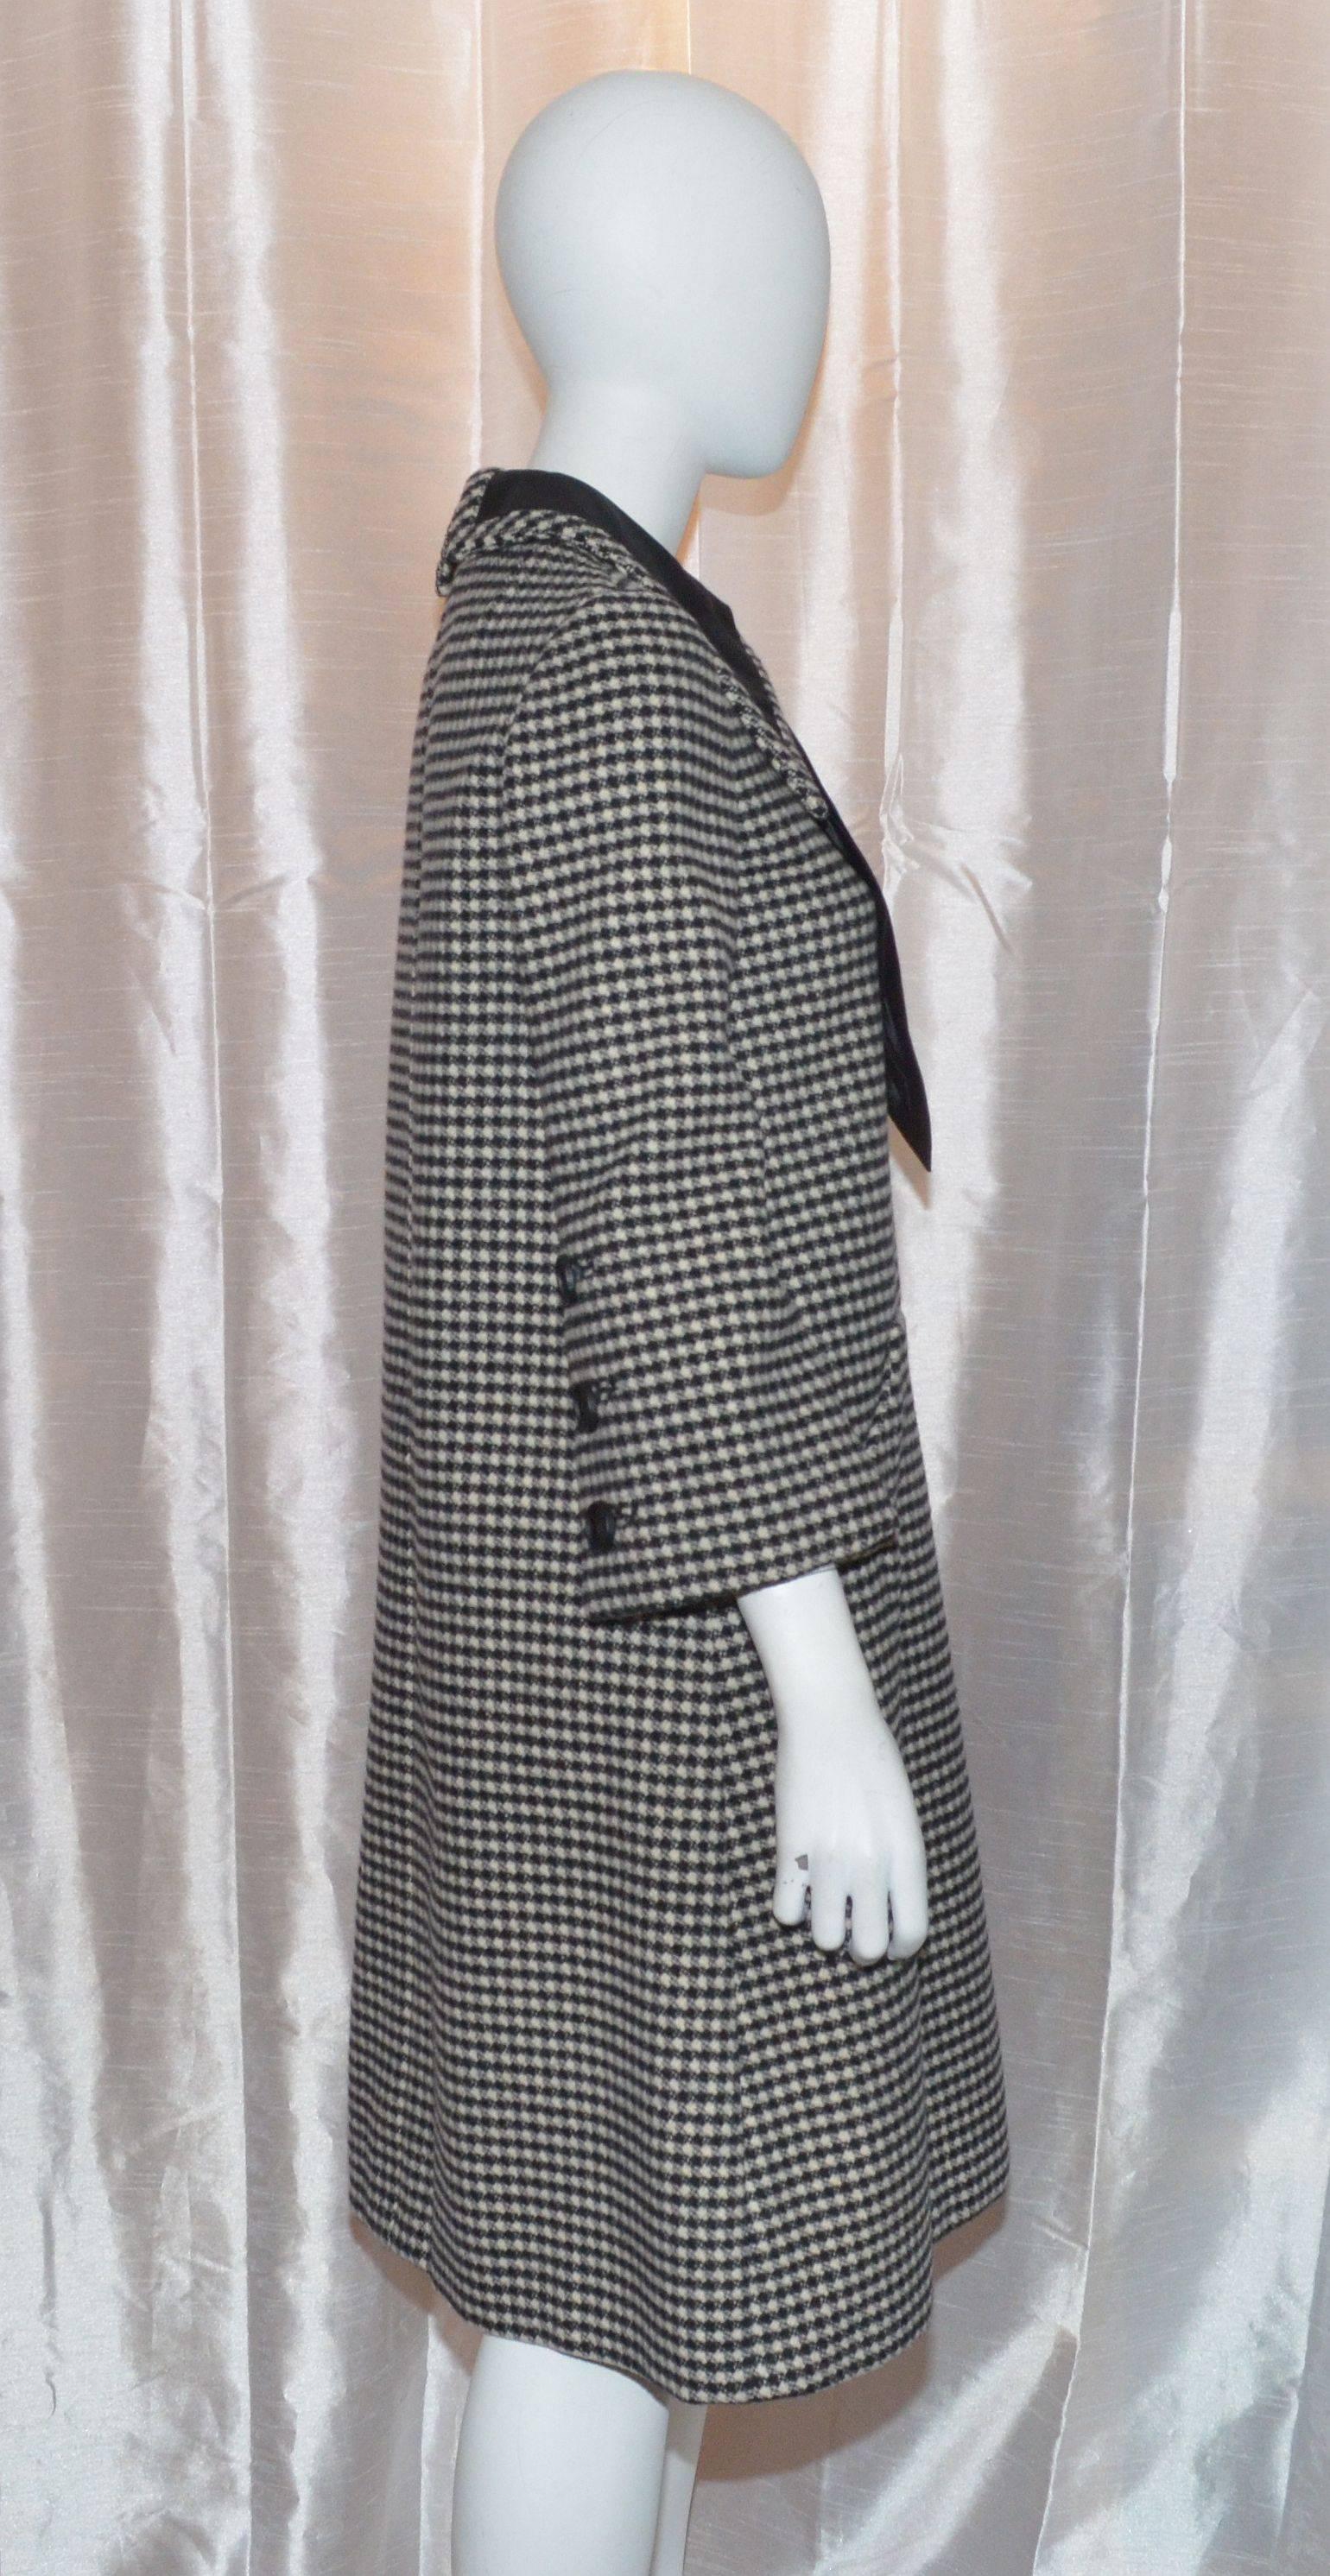 Vintage Geoffrey Beene 1960s Houndstooth Knit Large Collar and Bow Coat Dress
Vintage dress features large collars, and a satin bow that has a hook-and-eye closure at back. Dress also has a back zipper fastening, two slip pockets at the low waist,